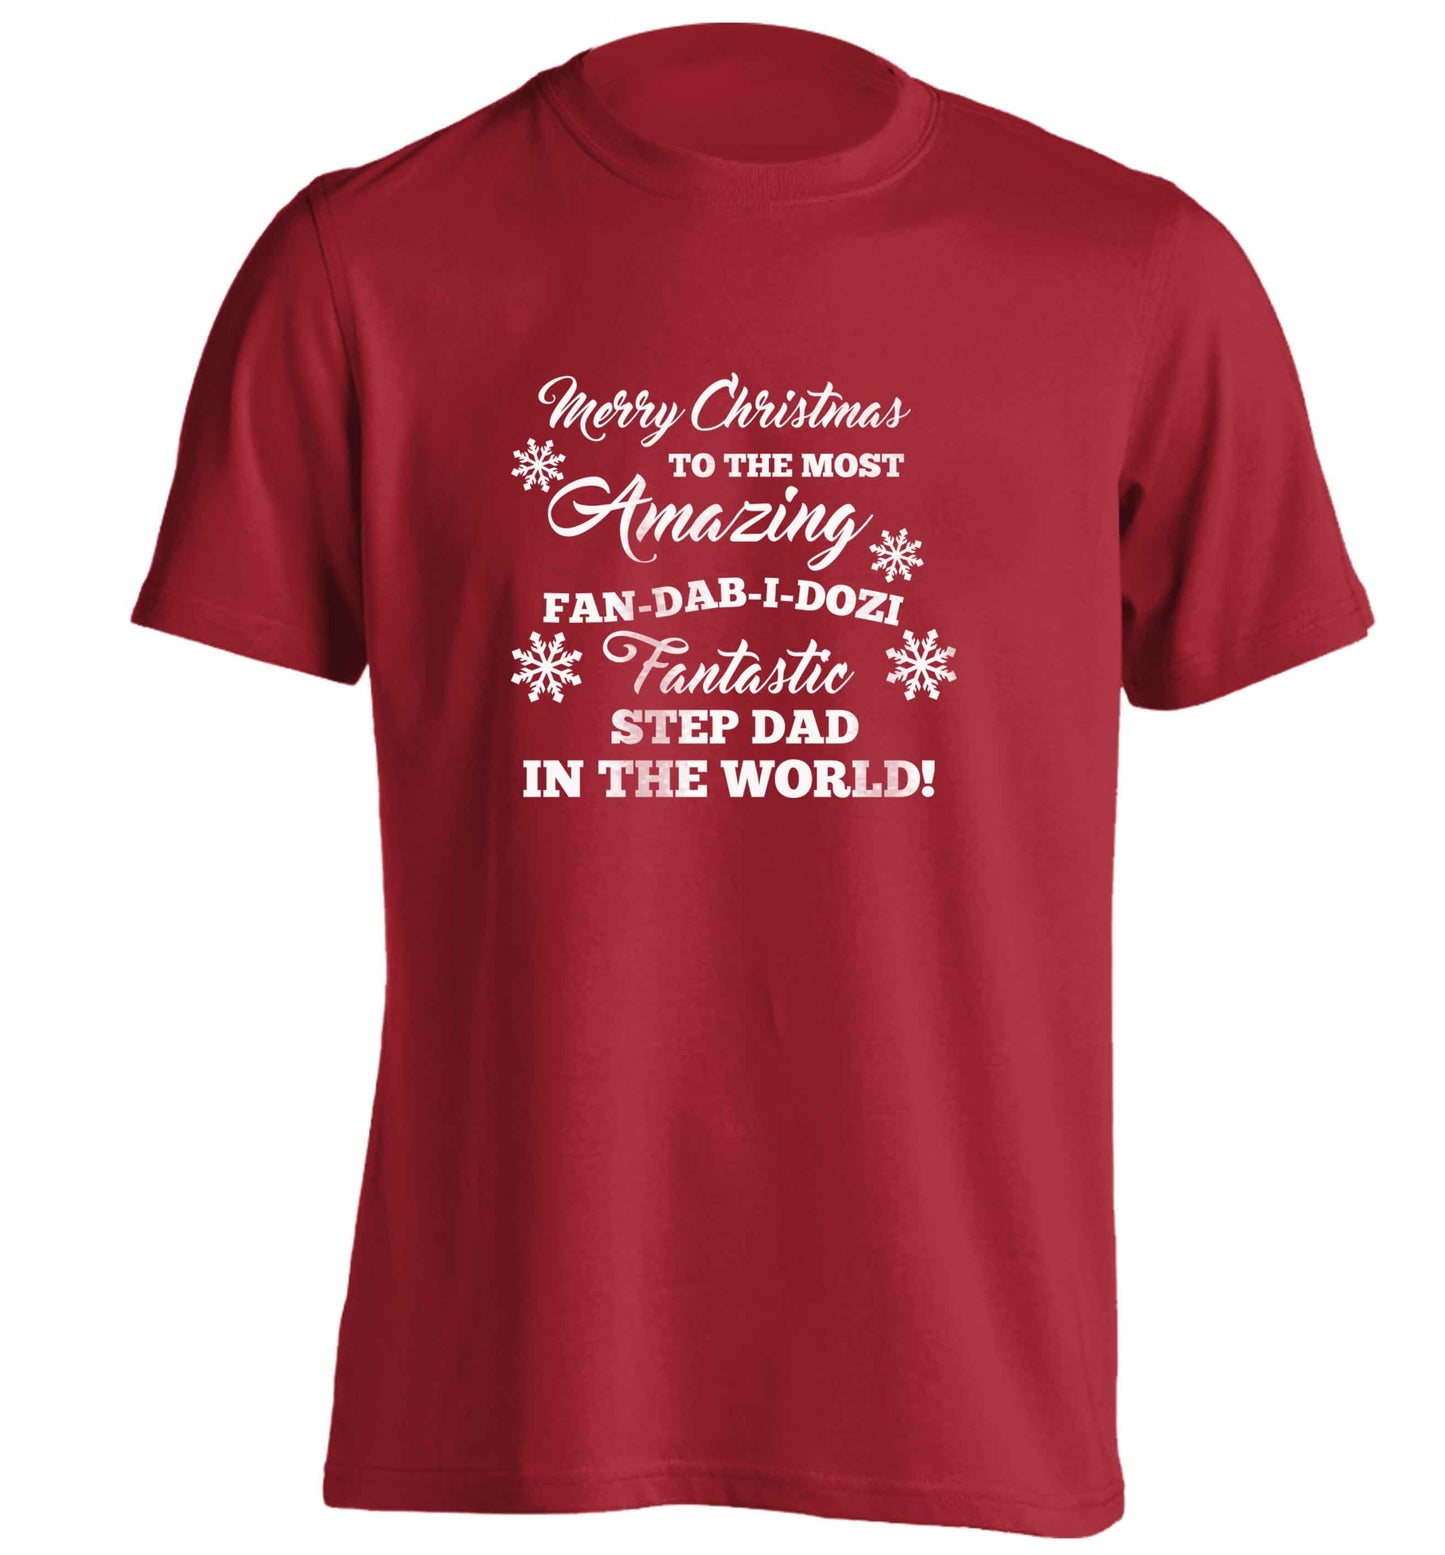 Merry Christmas to the most amazing fan-dab-i-dozi fantasic Step Dad in the world adults unisex red Tshirt 2XL